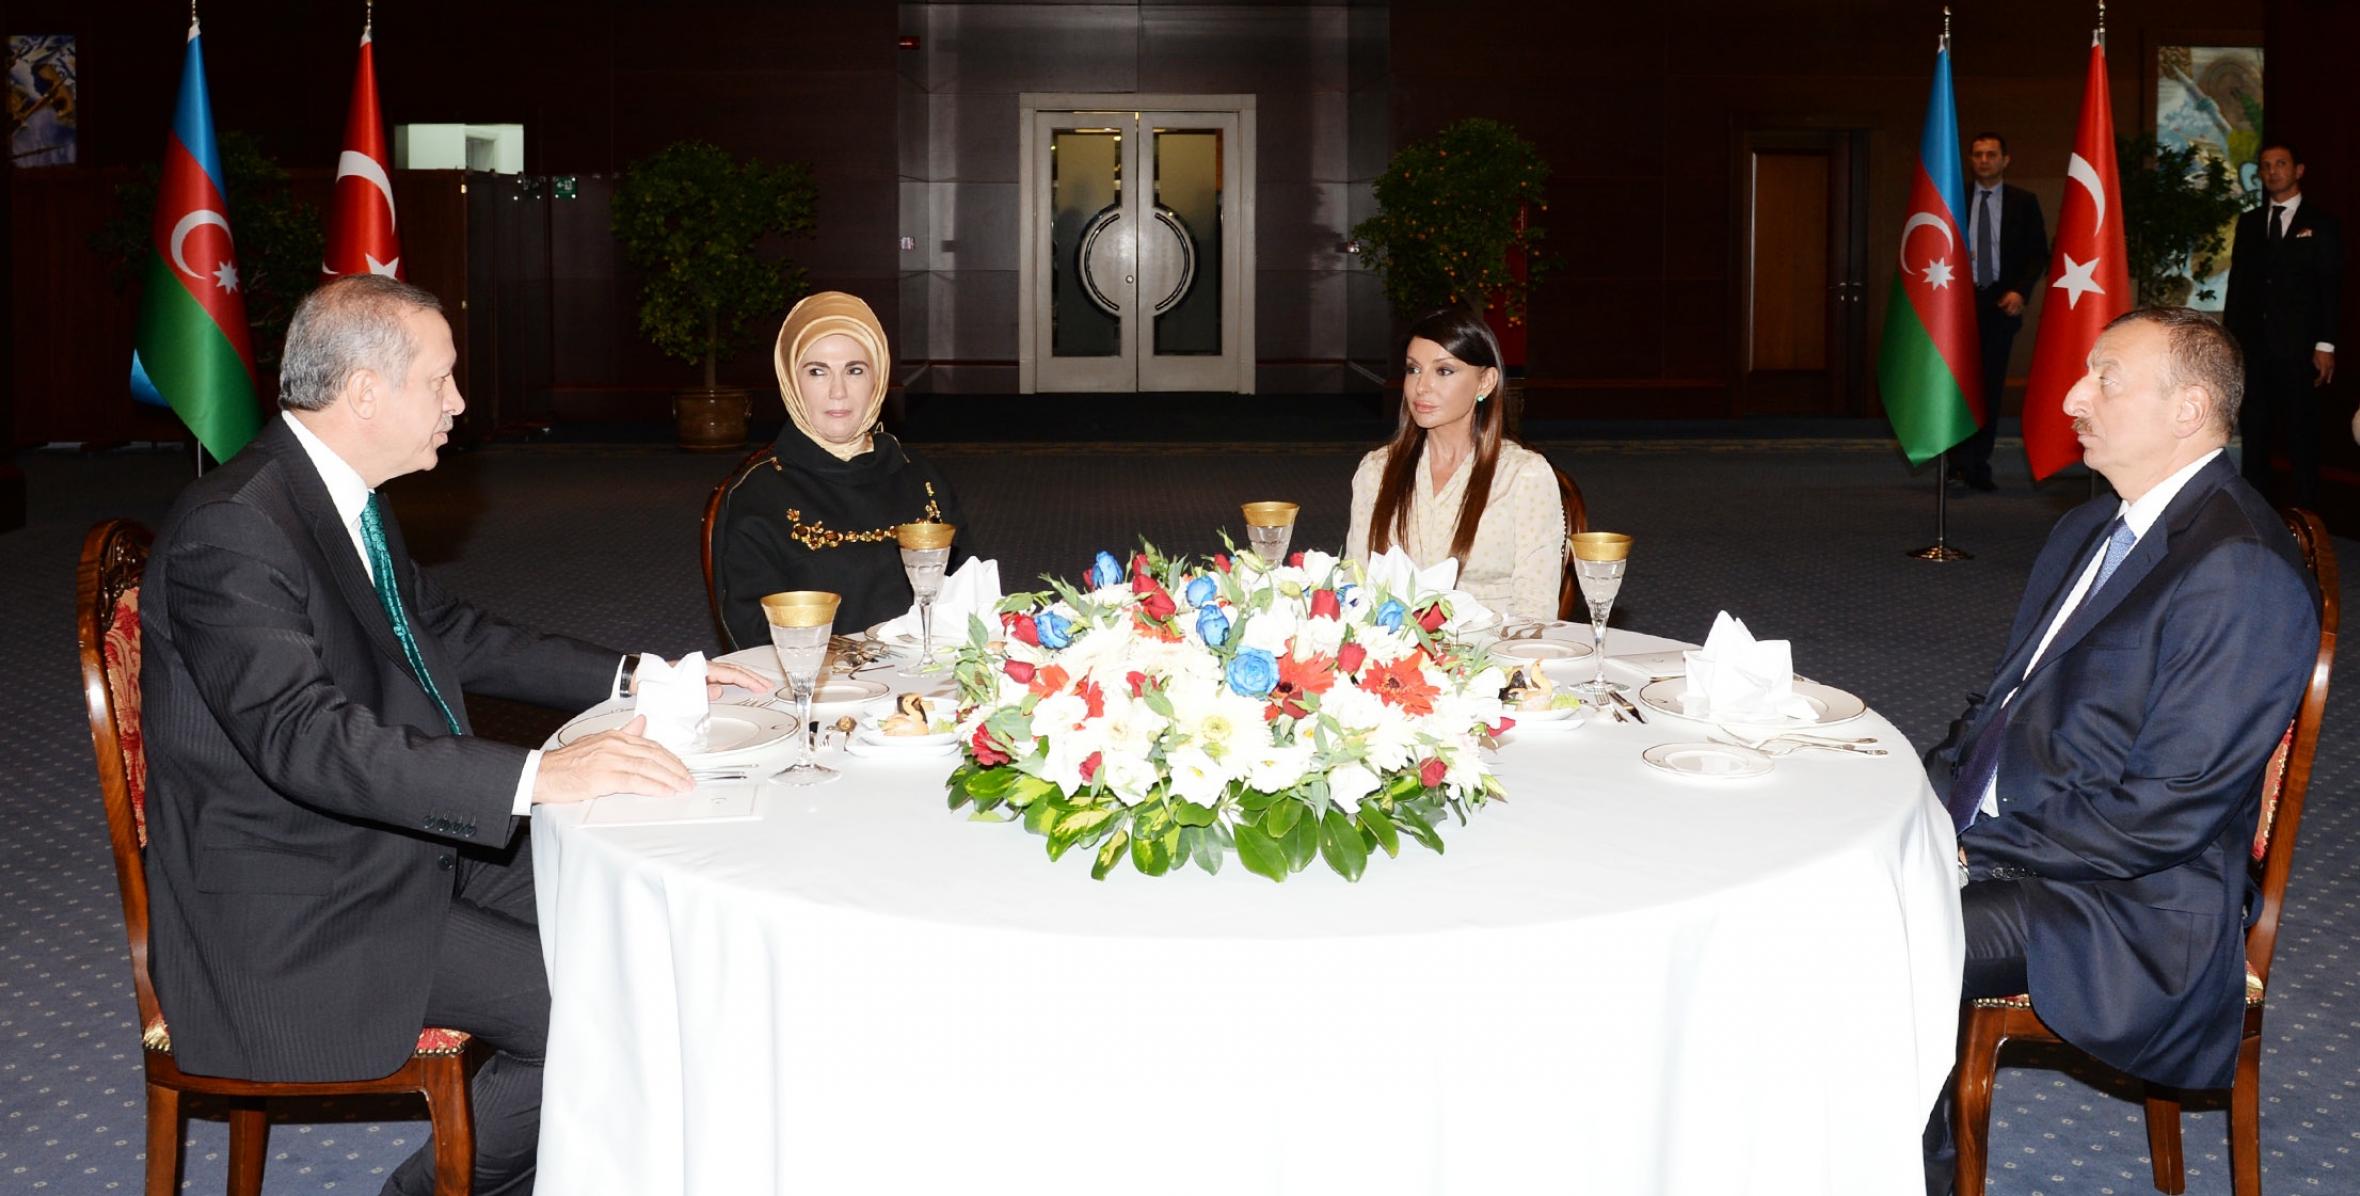 The Azerbaijani President and the Turkish Prime Minister had a joint dinner